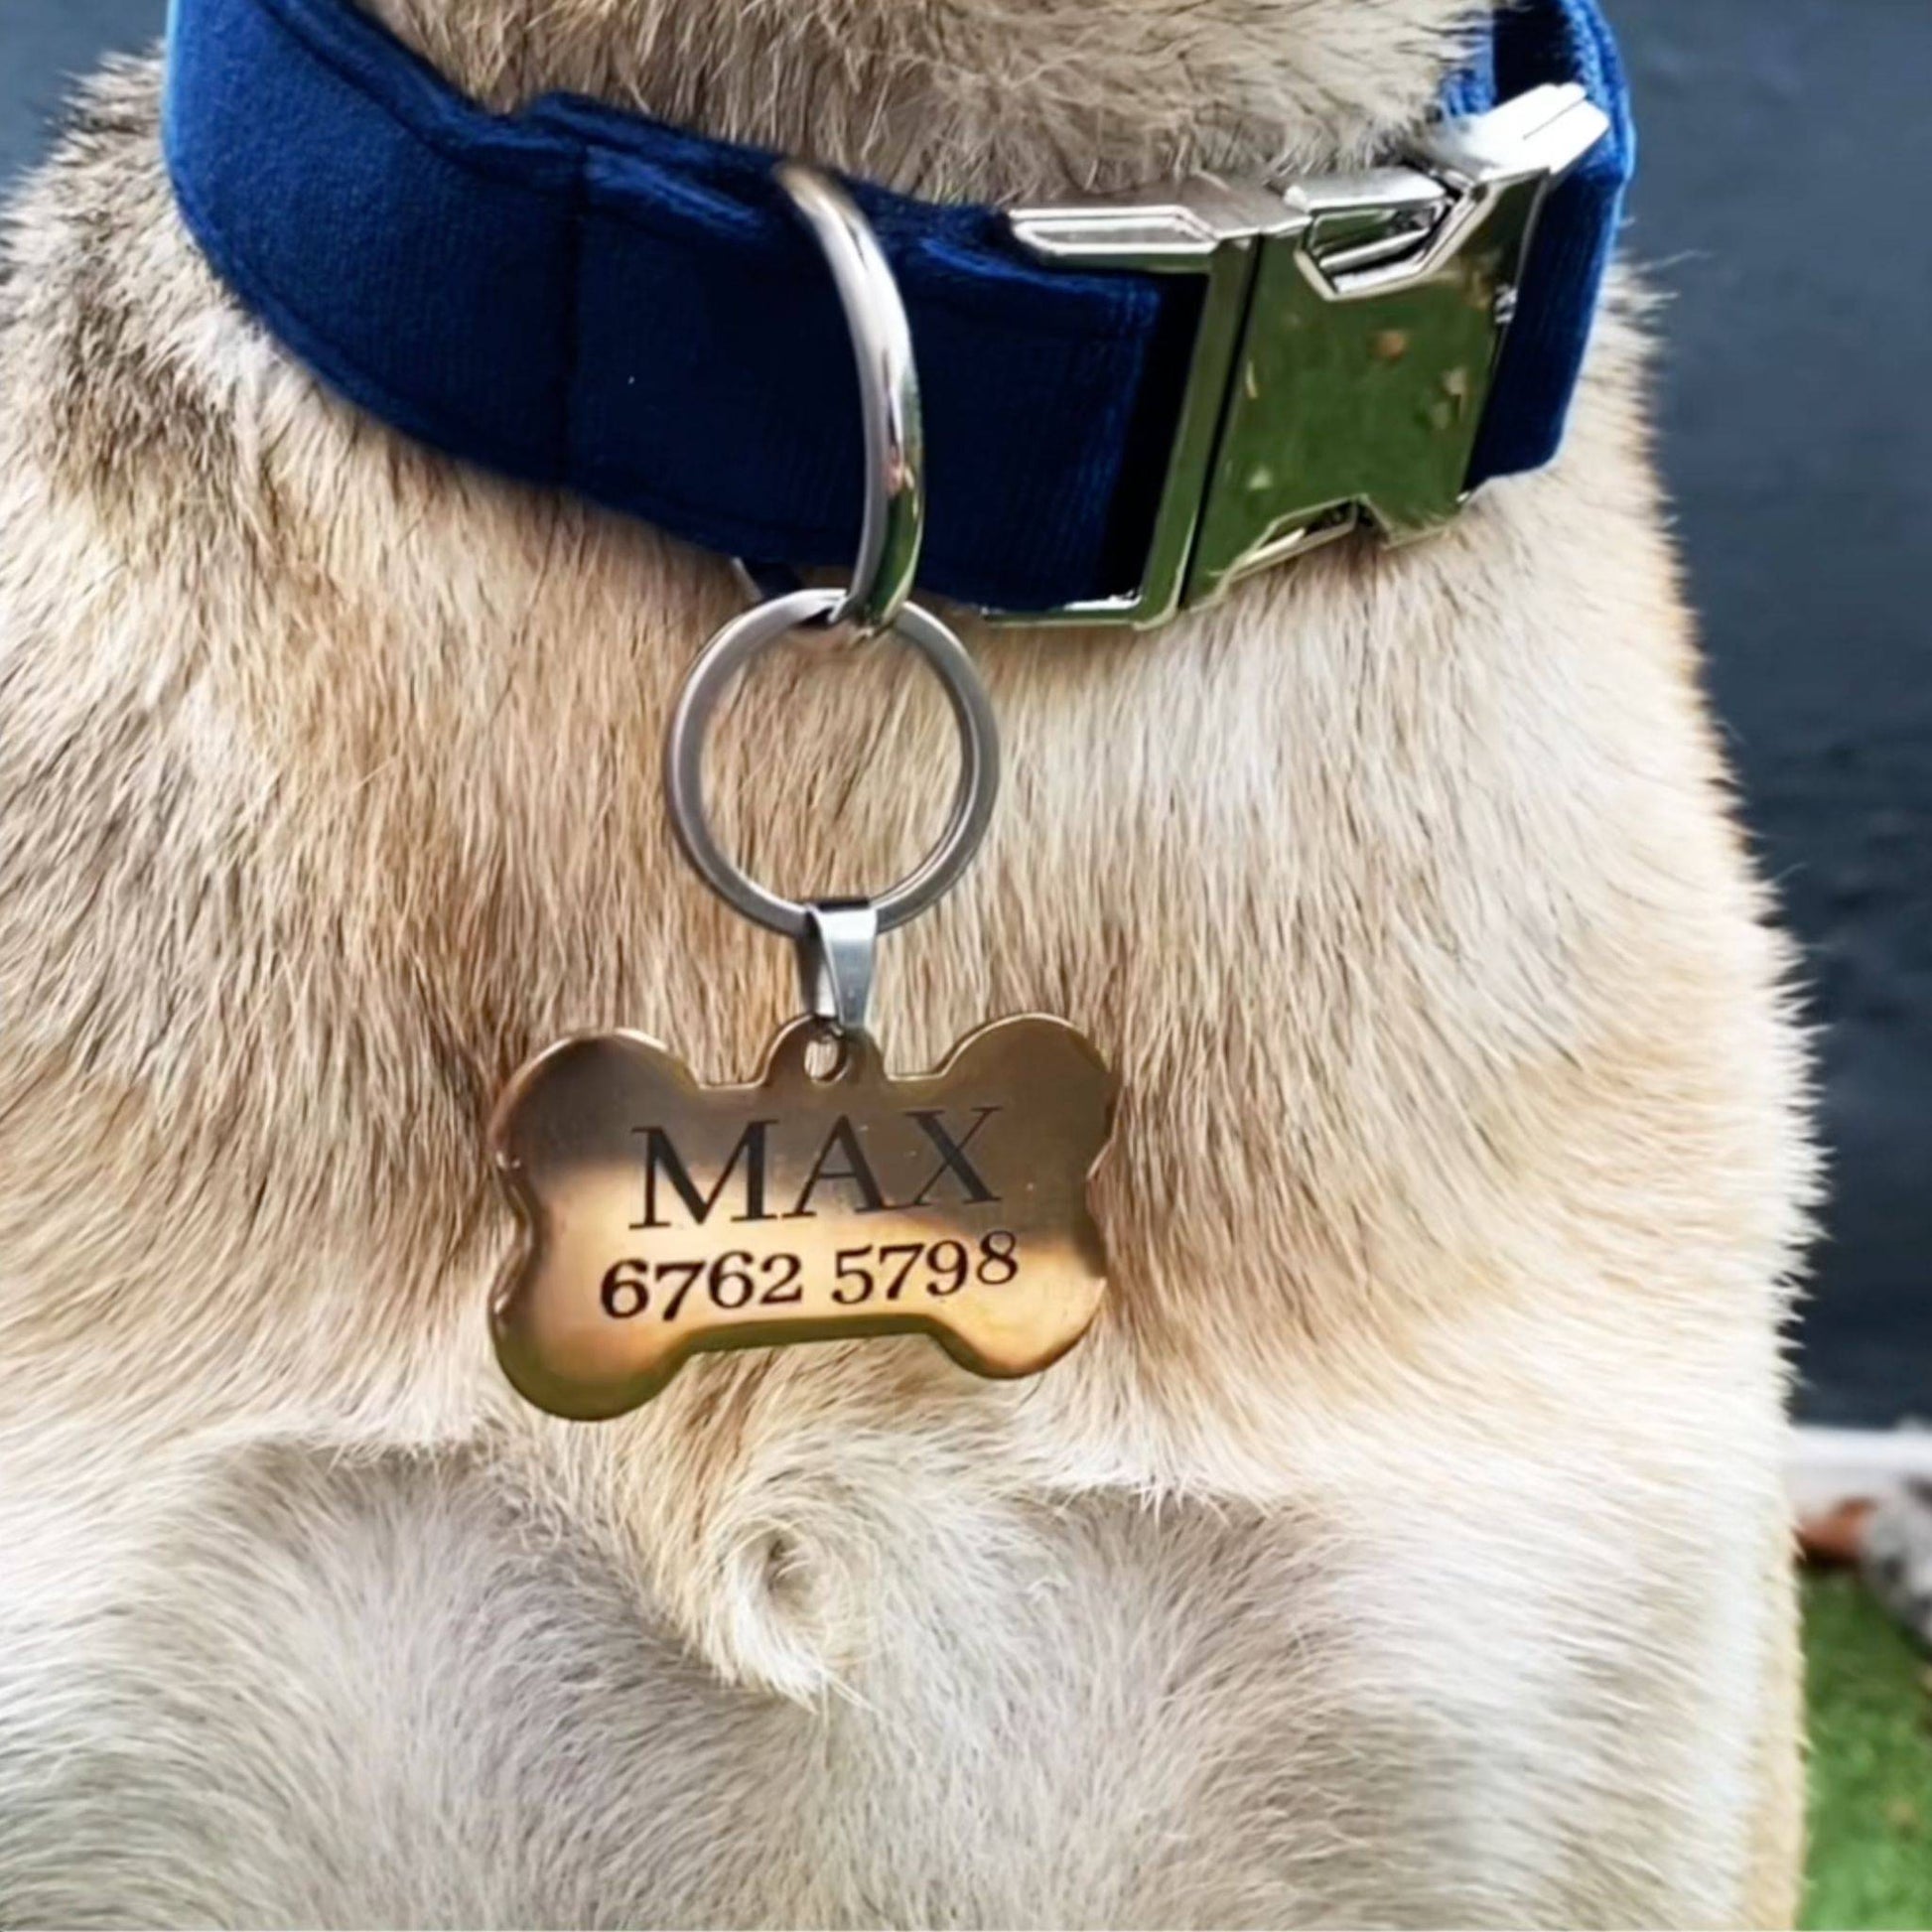 Personalized Pet ID Tag l Olive Dog with FREE Rubit Dog Tag Clip